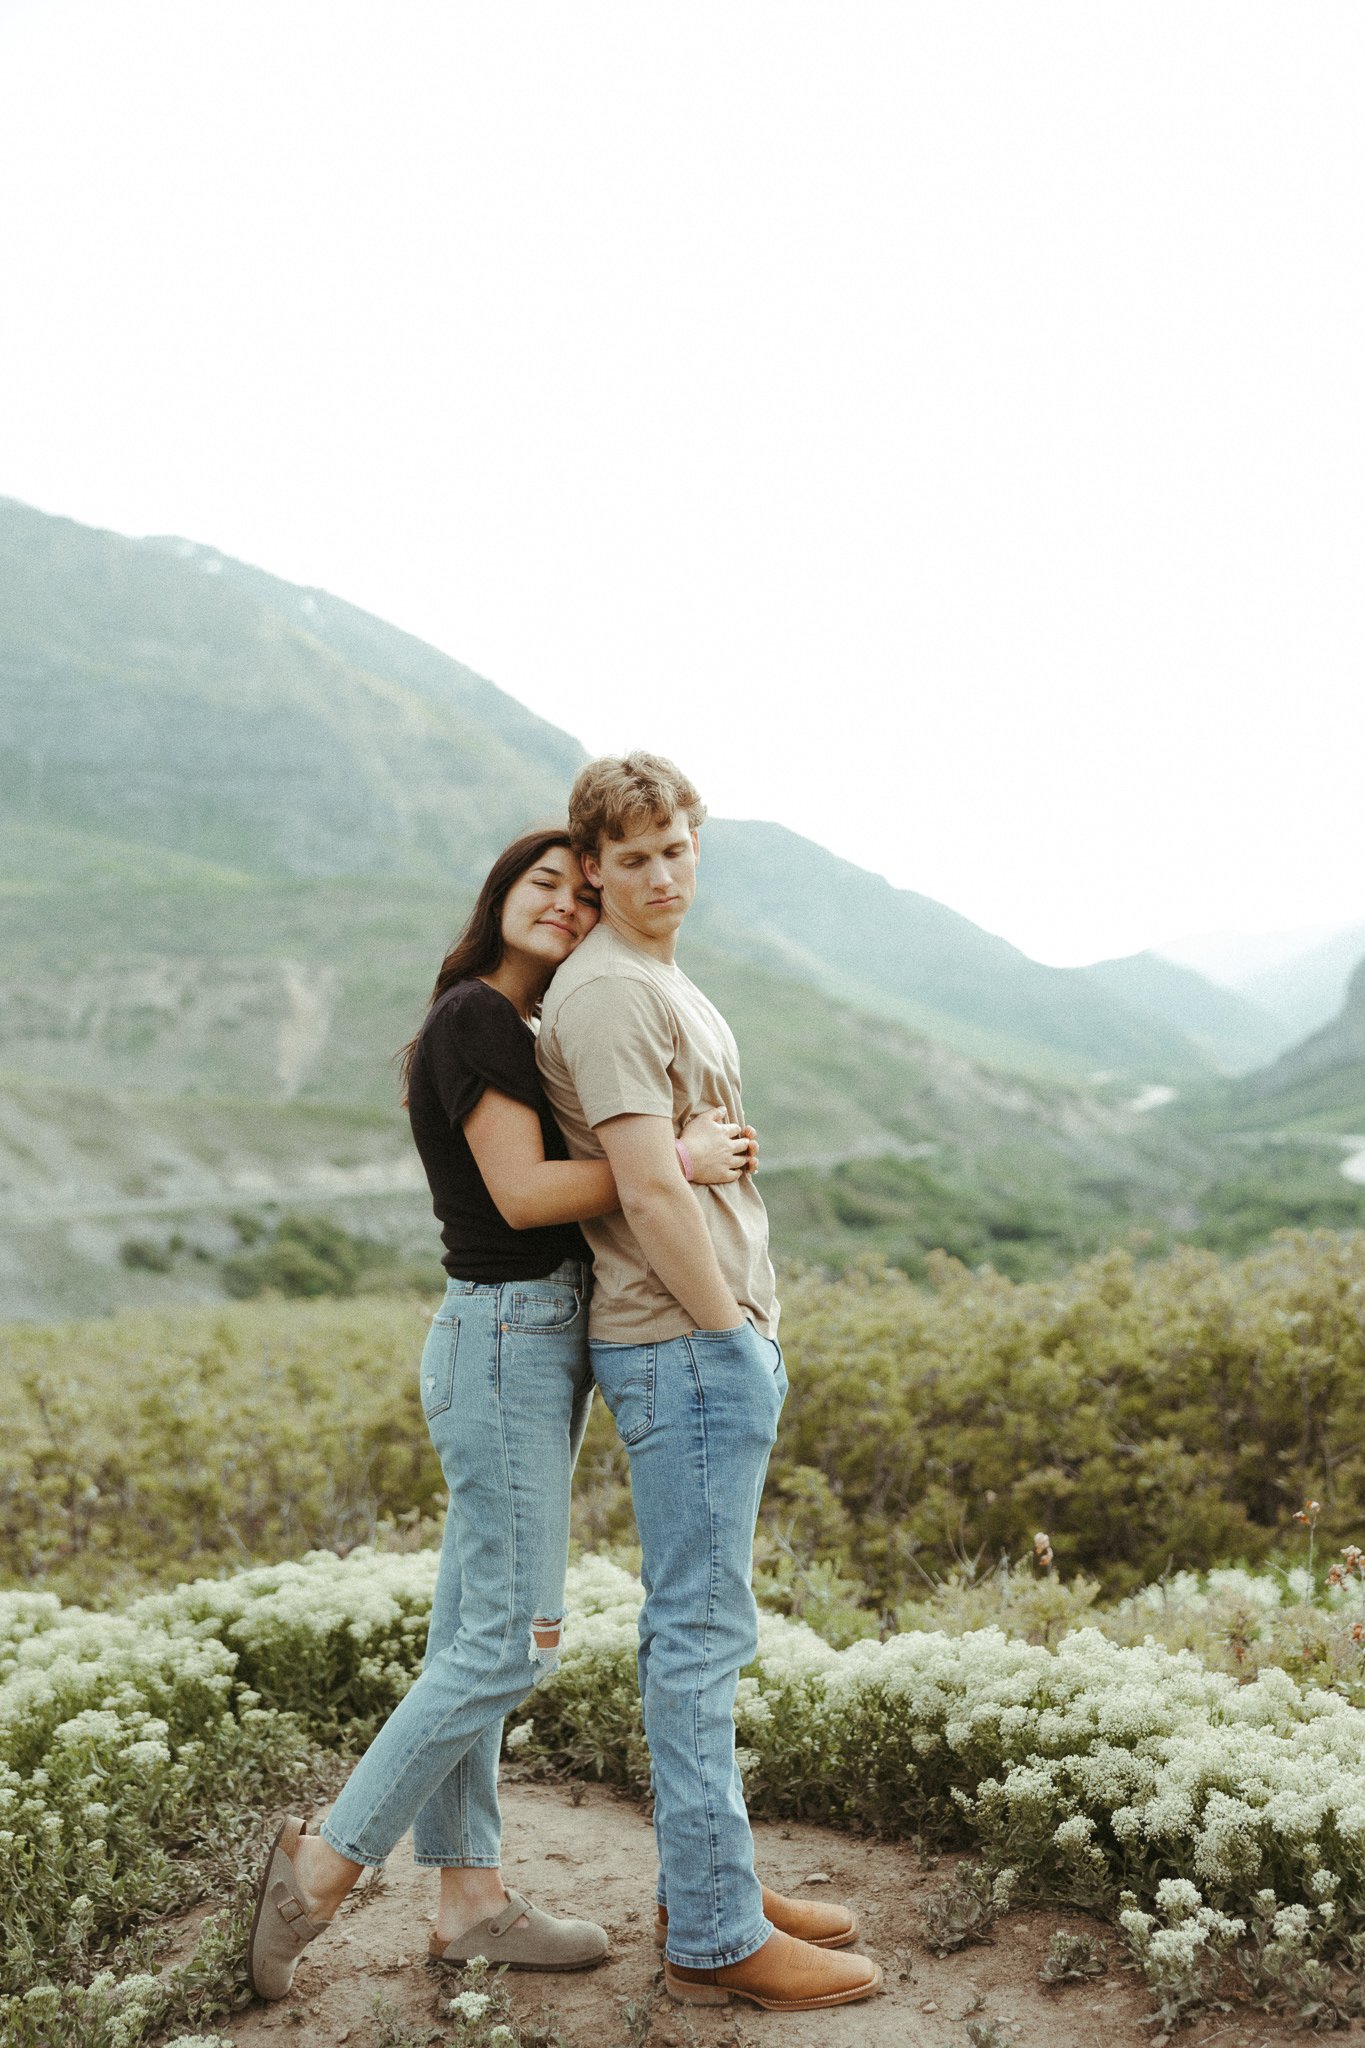 Spring-Provo-Canyon-Wildflowers-Engagement-Session-62